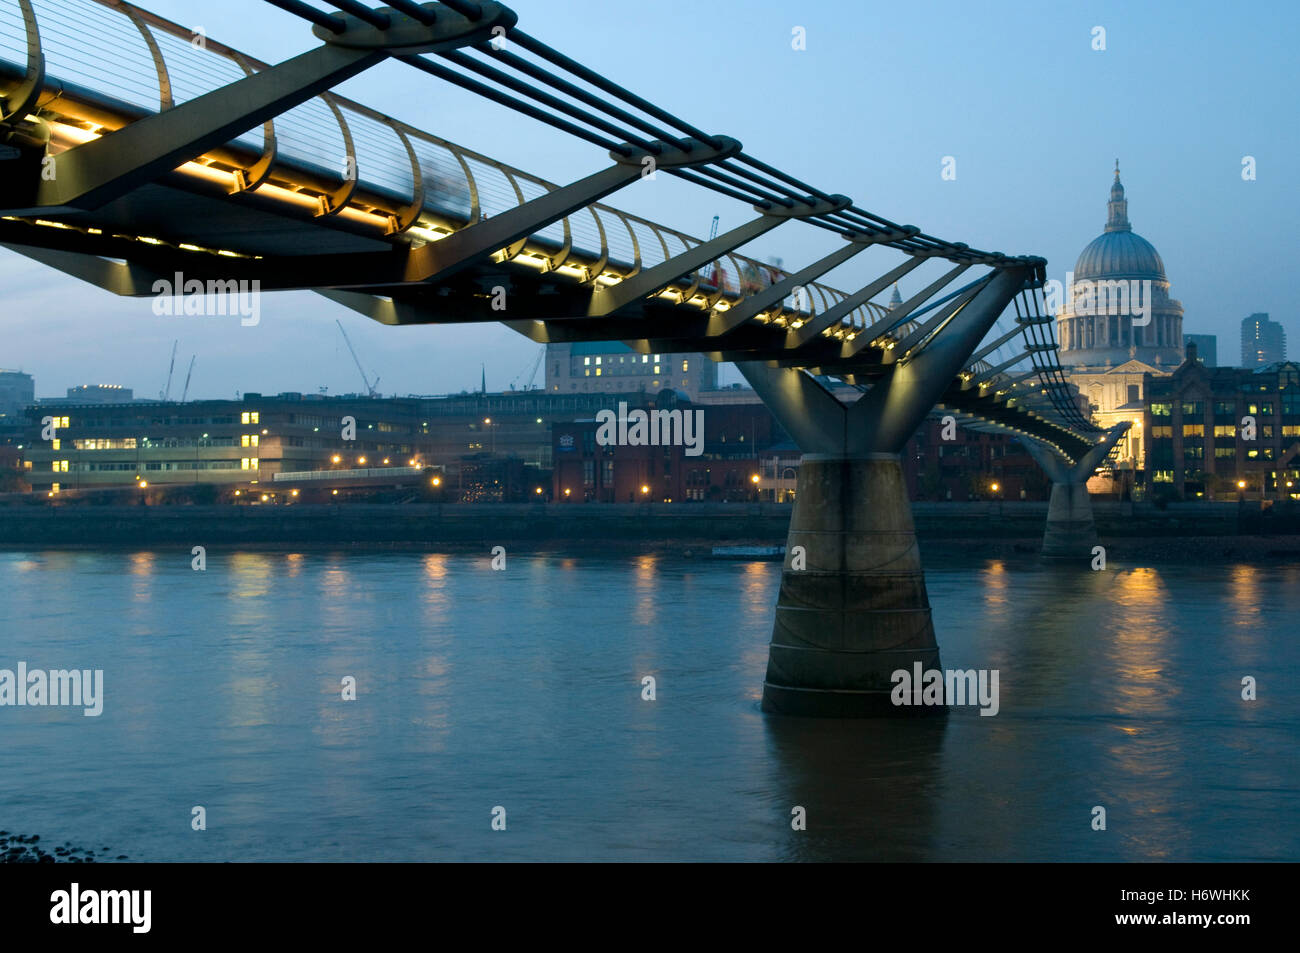 Millennium Bridge over the Thames and St. Paul's Cathedral at night, London, England, United Kingdom, Europe Stock Photo